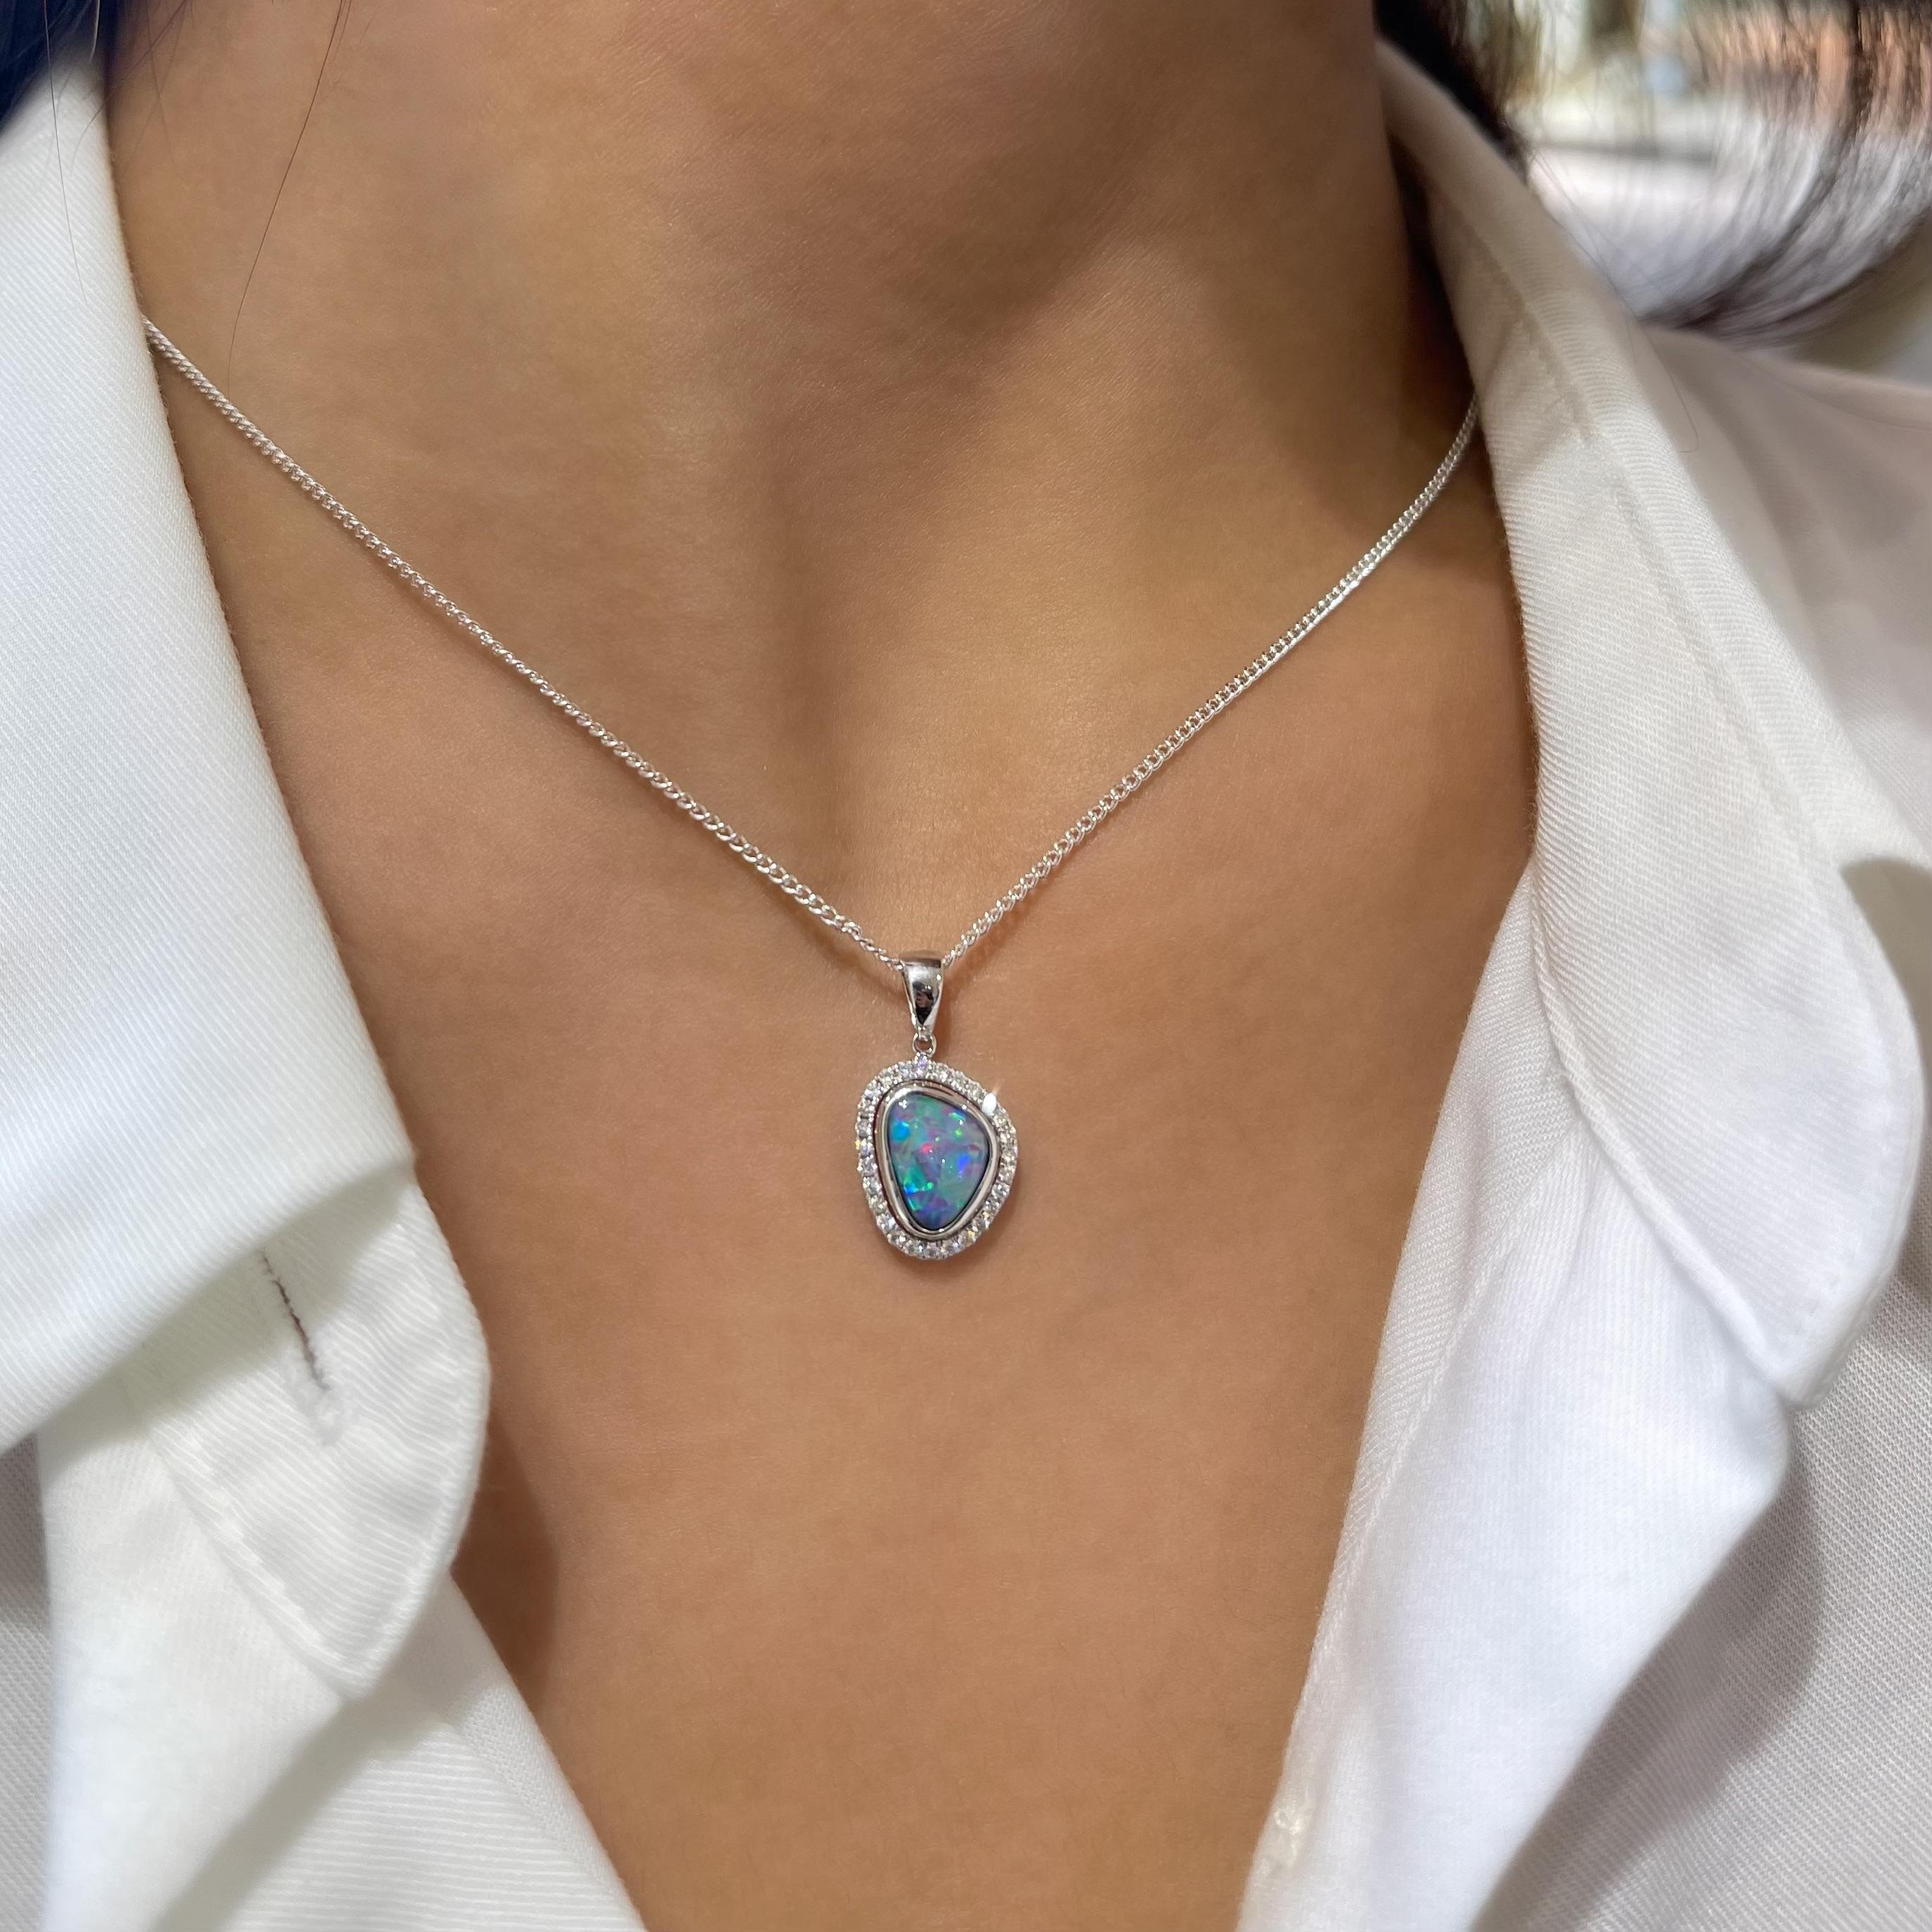 The ‘Elita’ opal doublet pendant (1.13ct) masterfully set in 18K white gold and framed by a set of 45 delicate dazzling diamonds is a classic and romantic piece to express one’s sophistication. Discrete enough to work either during the day or the